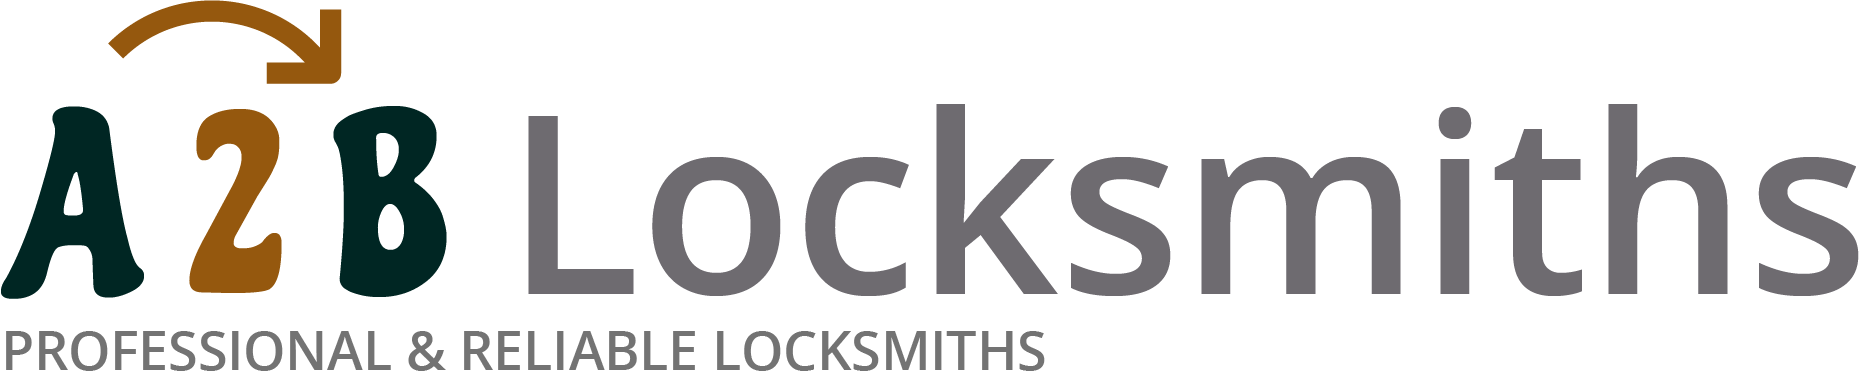 If you are locked out of house in Hoxton, our 24/7 local emergency locksmith services can help you.